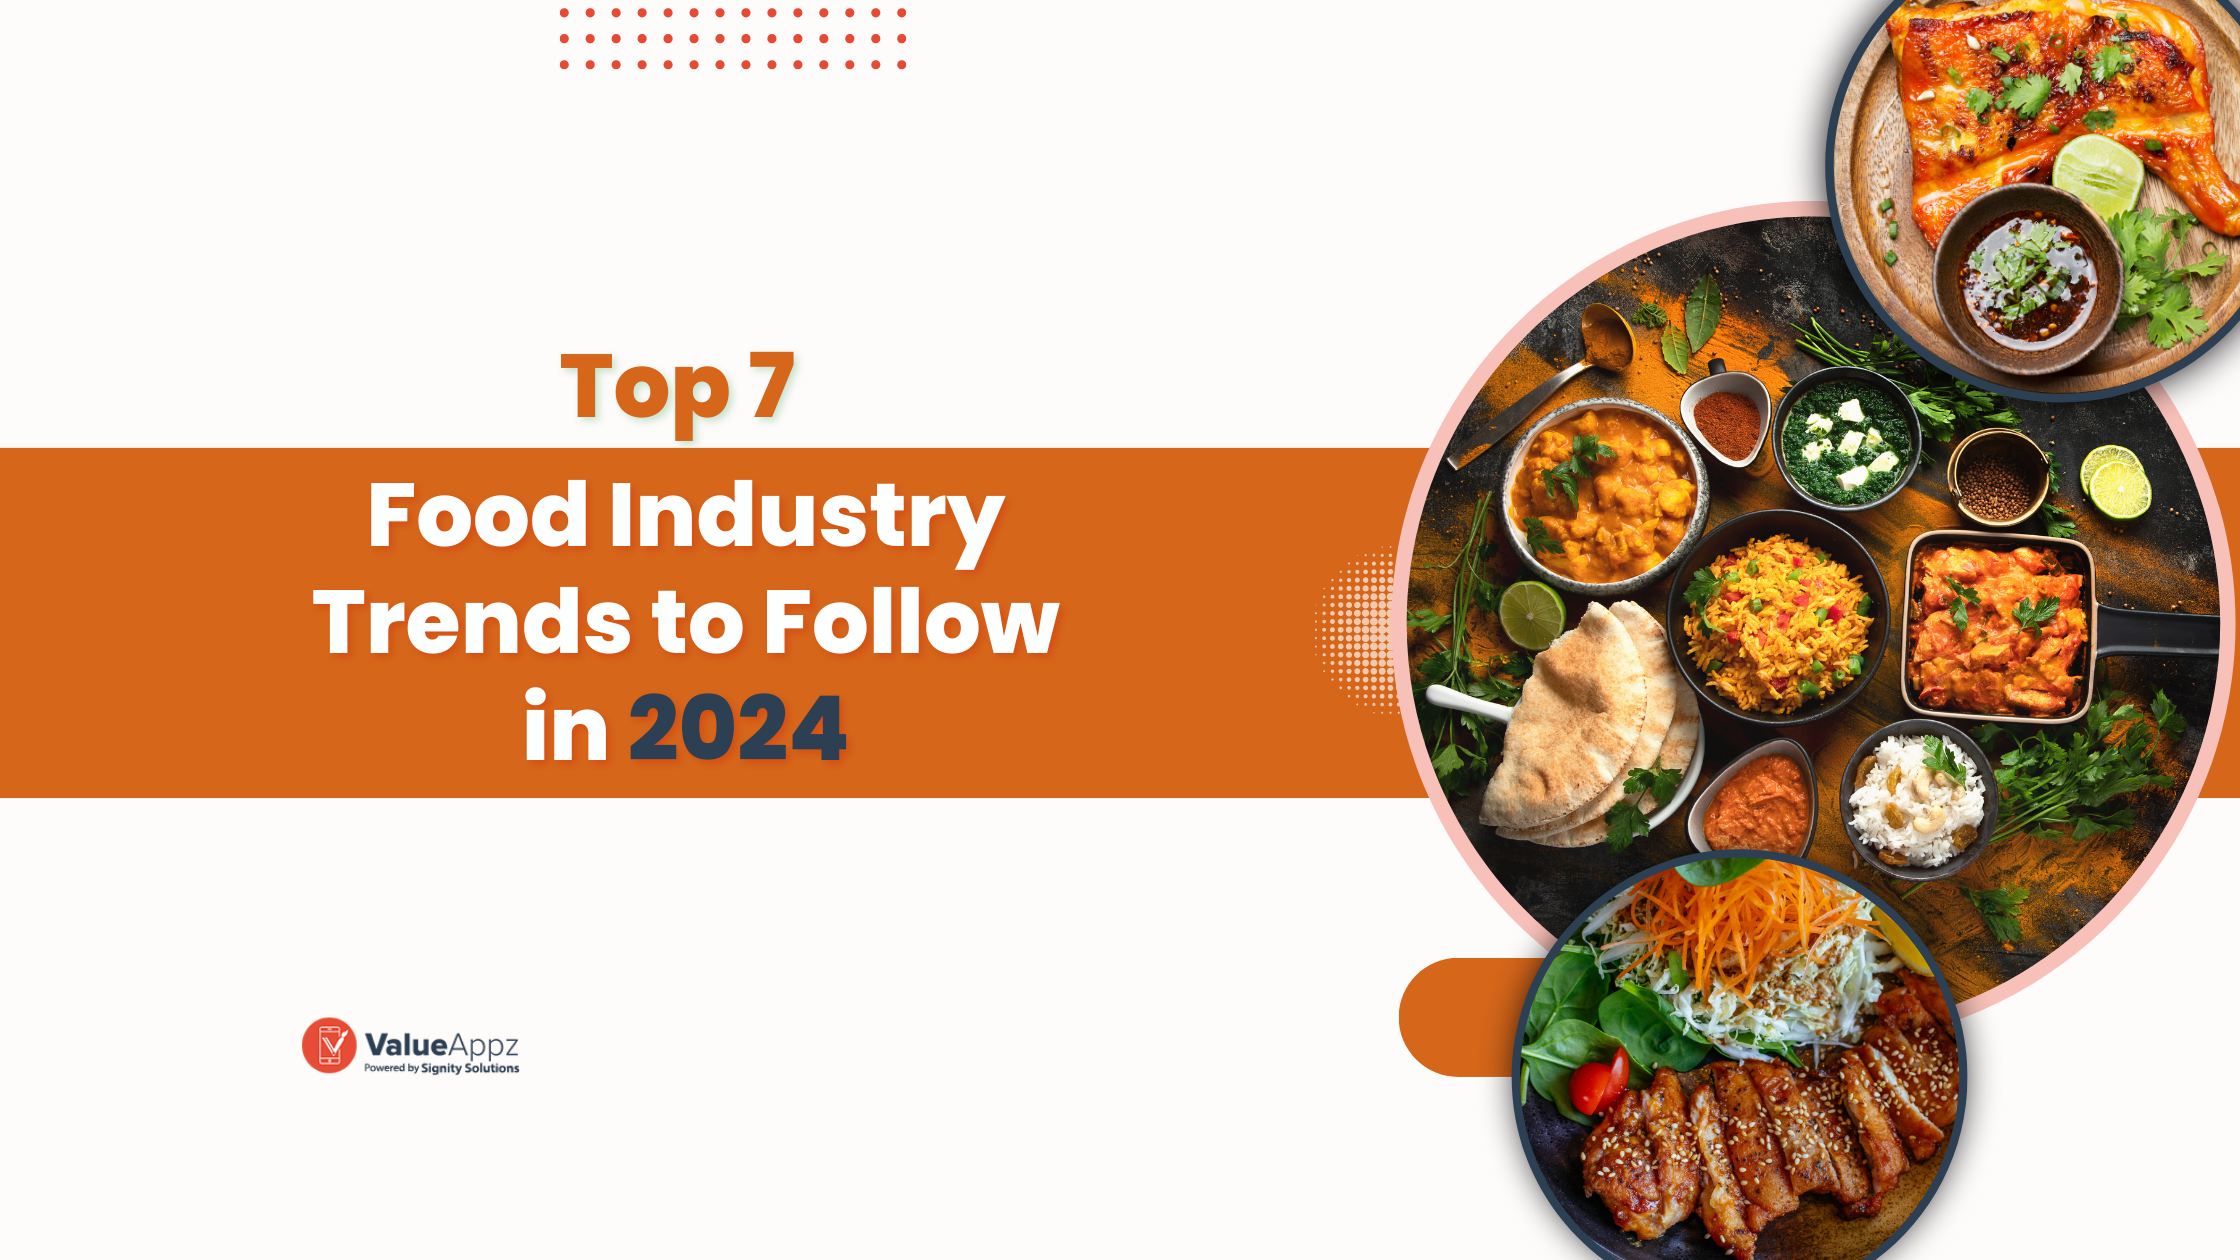 Top 7 Food Industry Trends to Follow in 2024